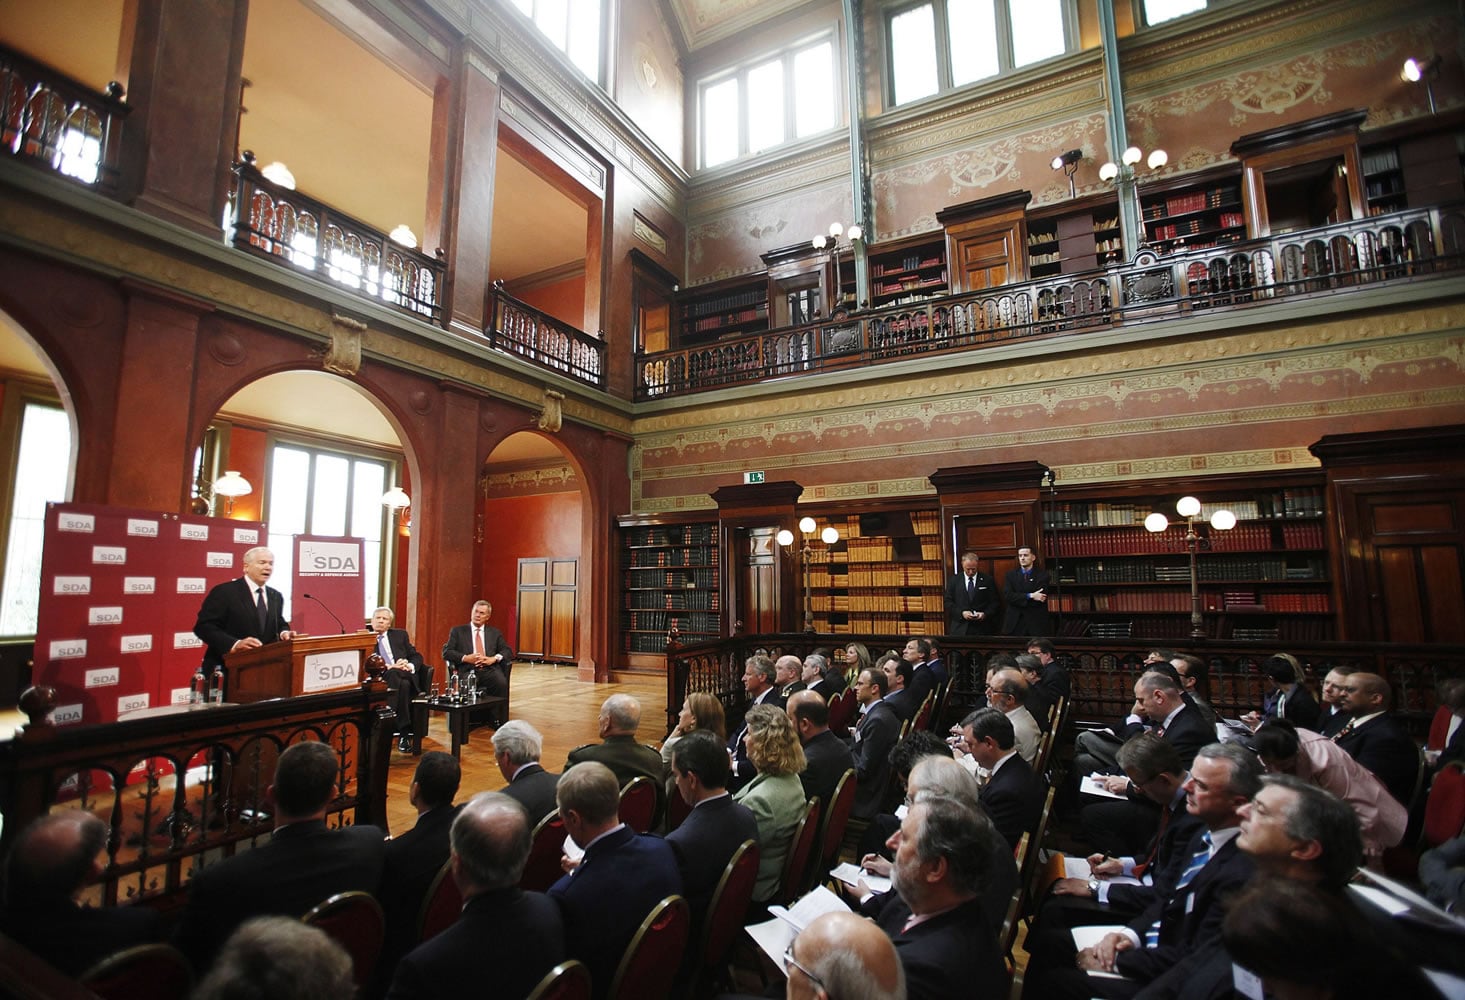 U.S. Defense Secretary Robert Gates speaks during a Security and Defense Agenda event at the Biblioteque Solvay in Brussels on Friday. In his final policy speech as Pentagon chief, Gates questioned the viability of NATO, saying its members' penny-pinching and lack of political will could hasten the end of U.S.